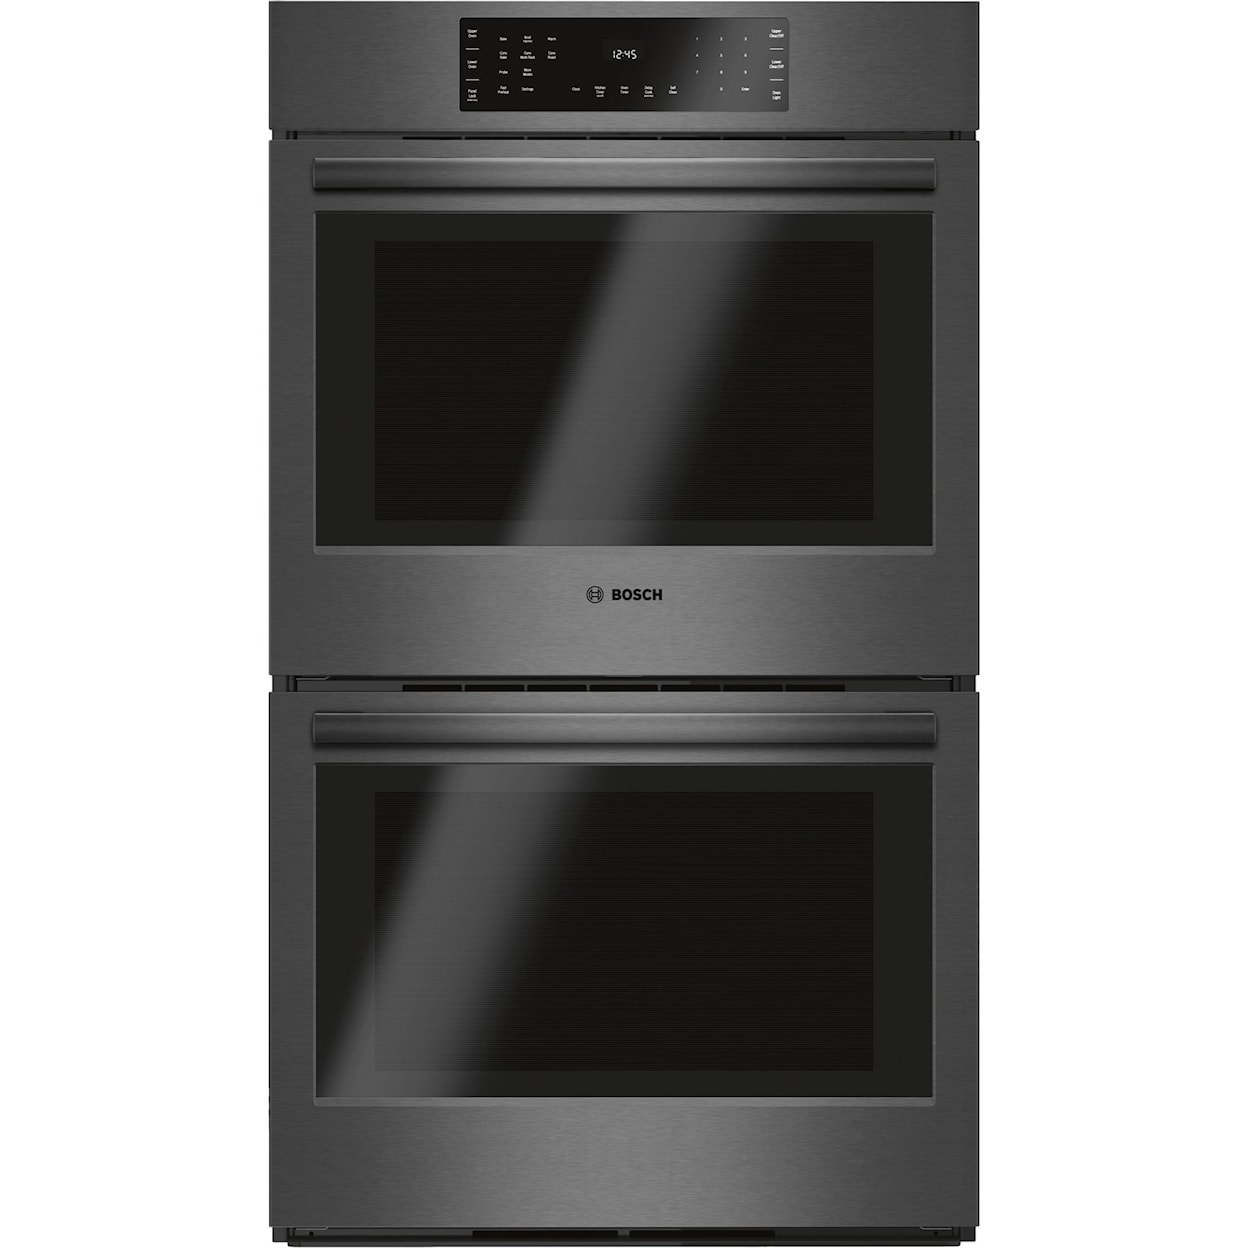 Bosch Electric Wall Ovens 30" Double Wall Oven